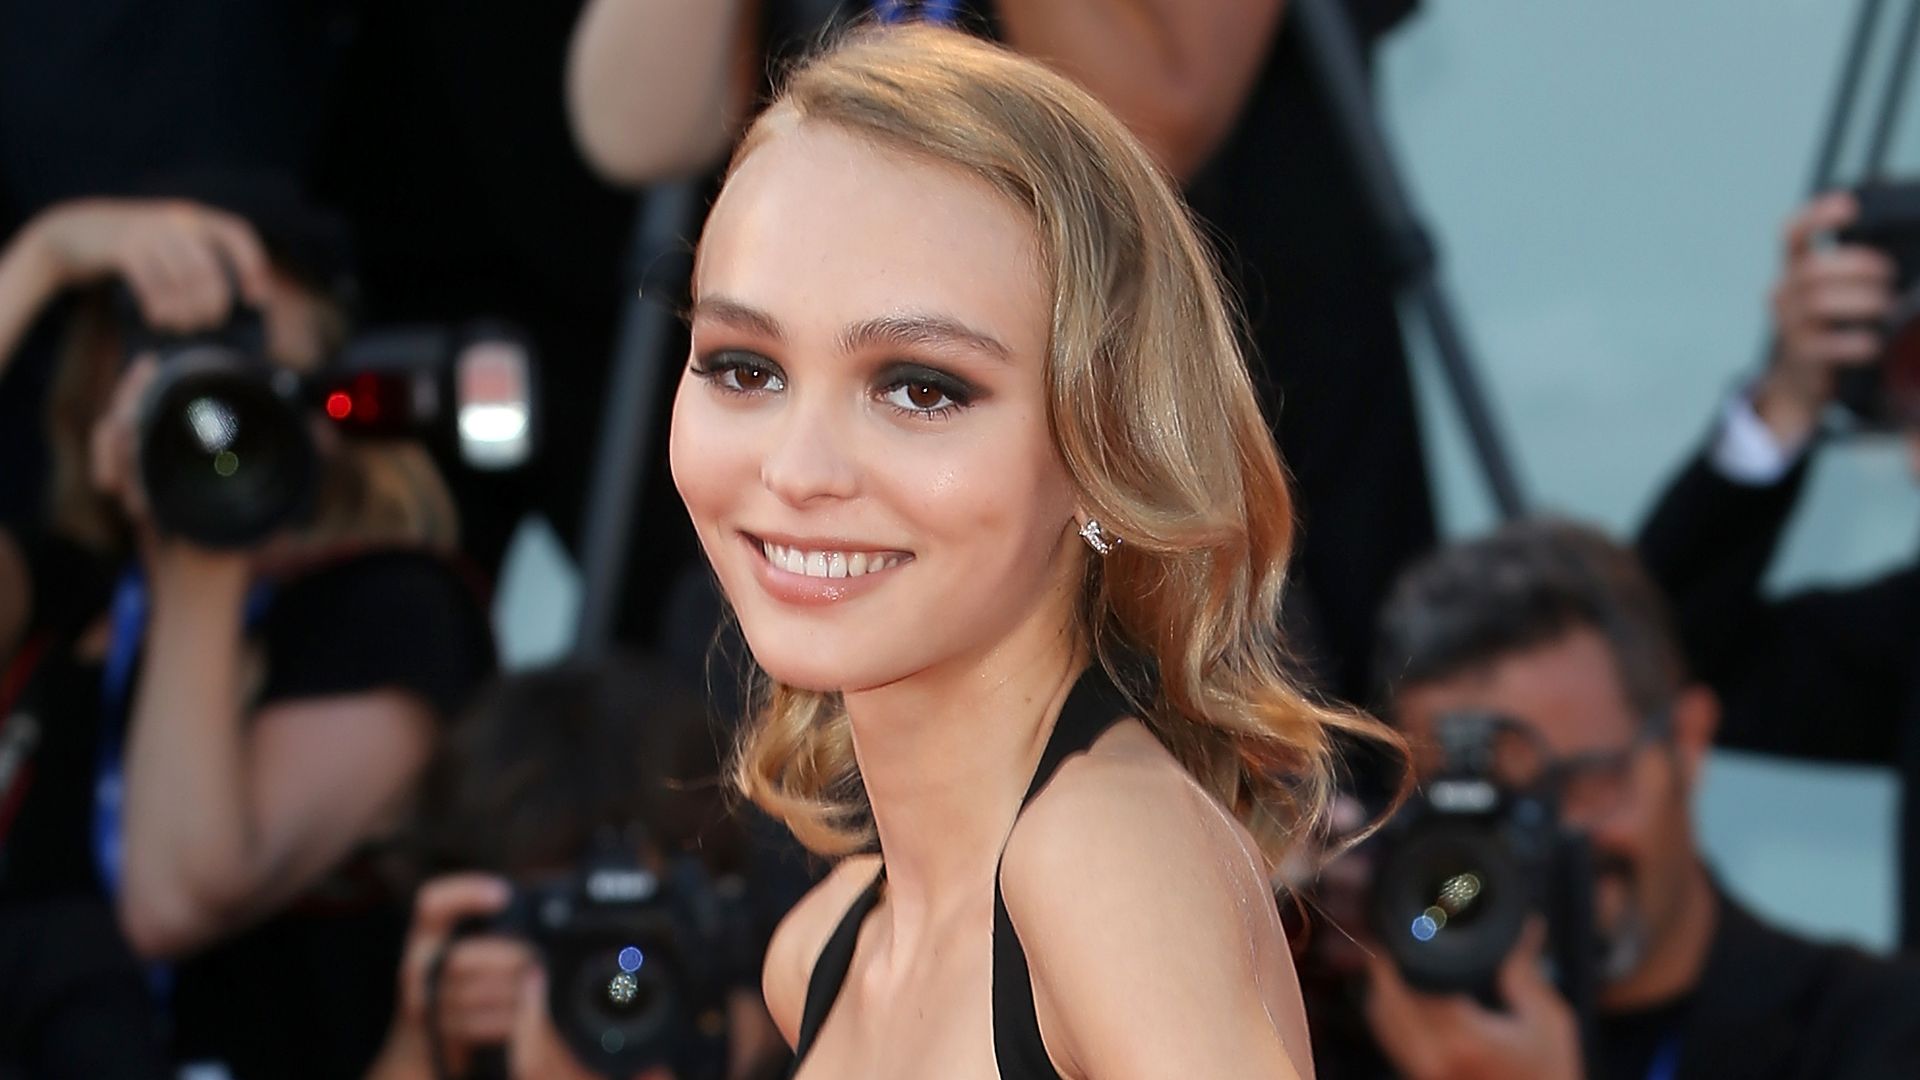 Lily Rose Depp: Latest News, Pictures & Videos - HELLO!